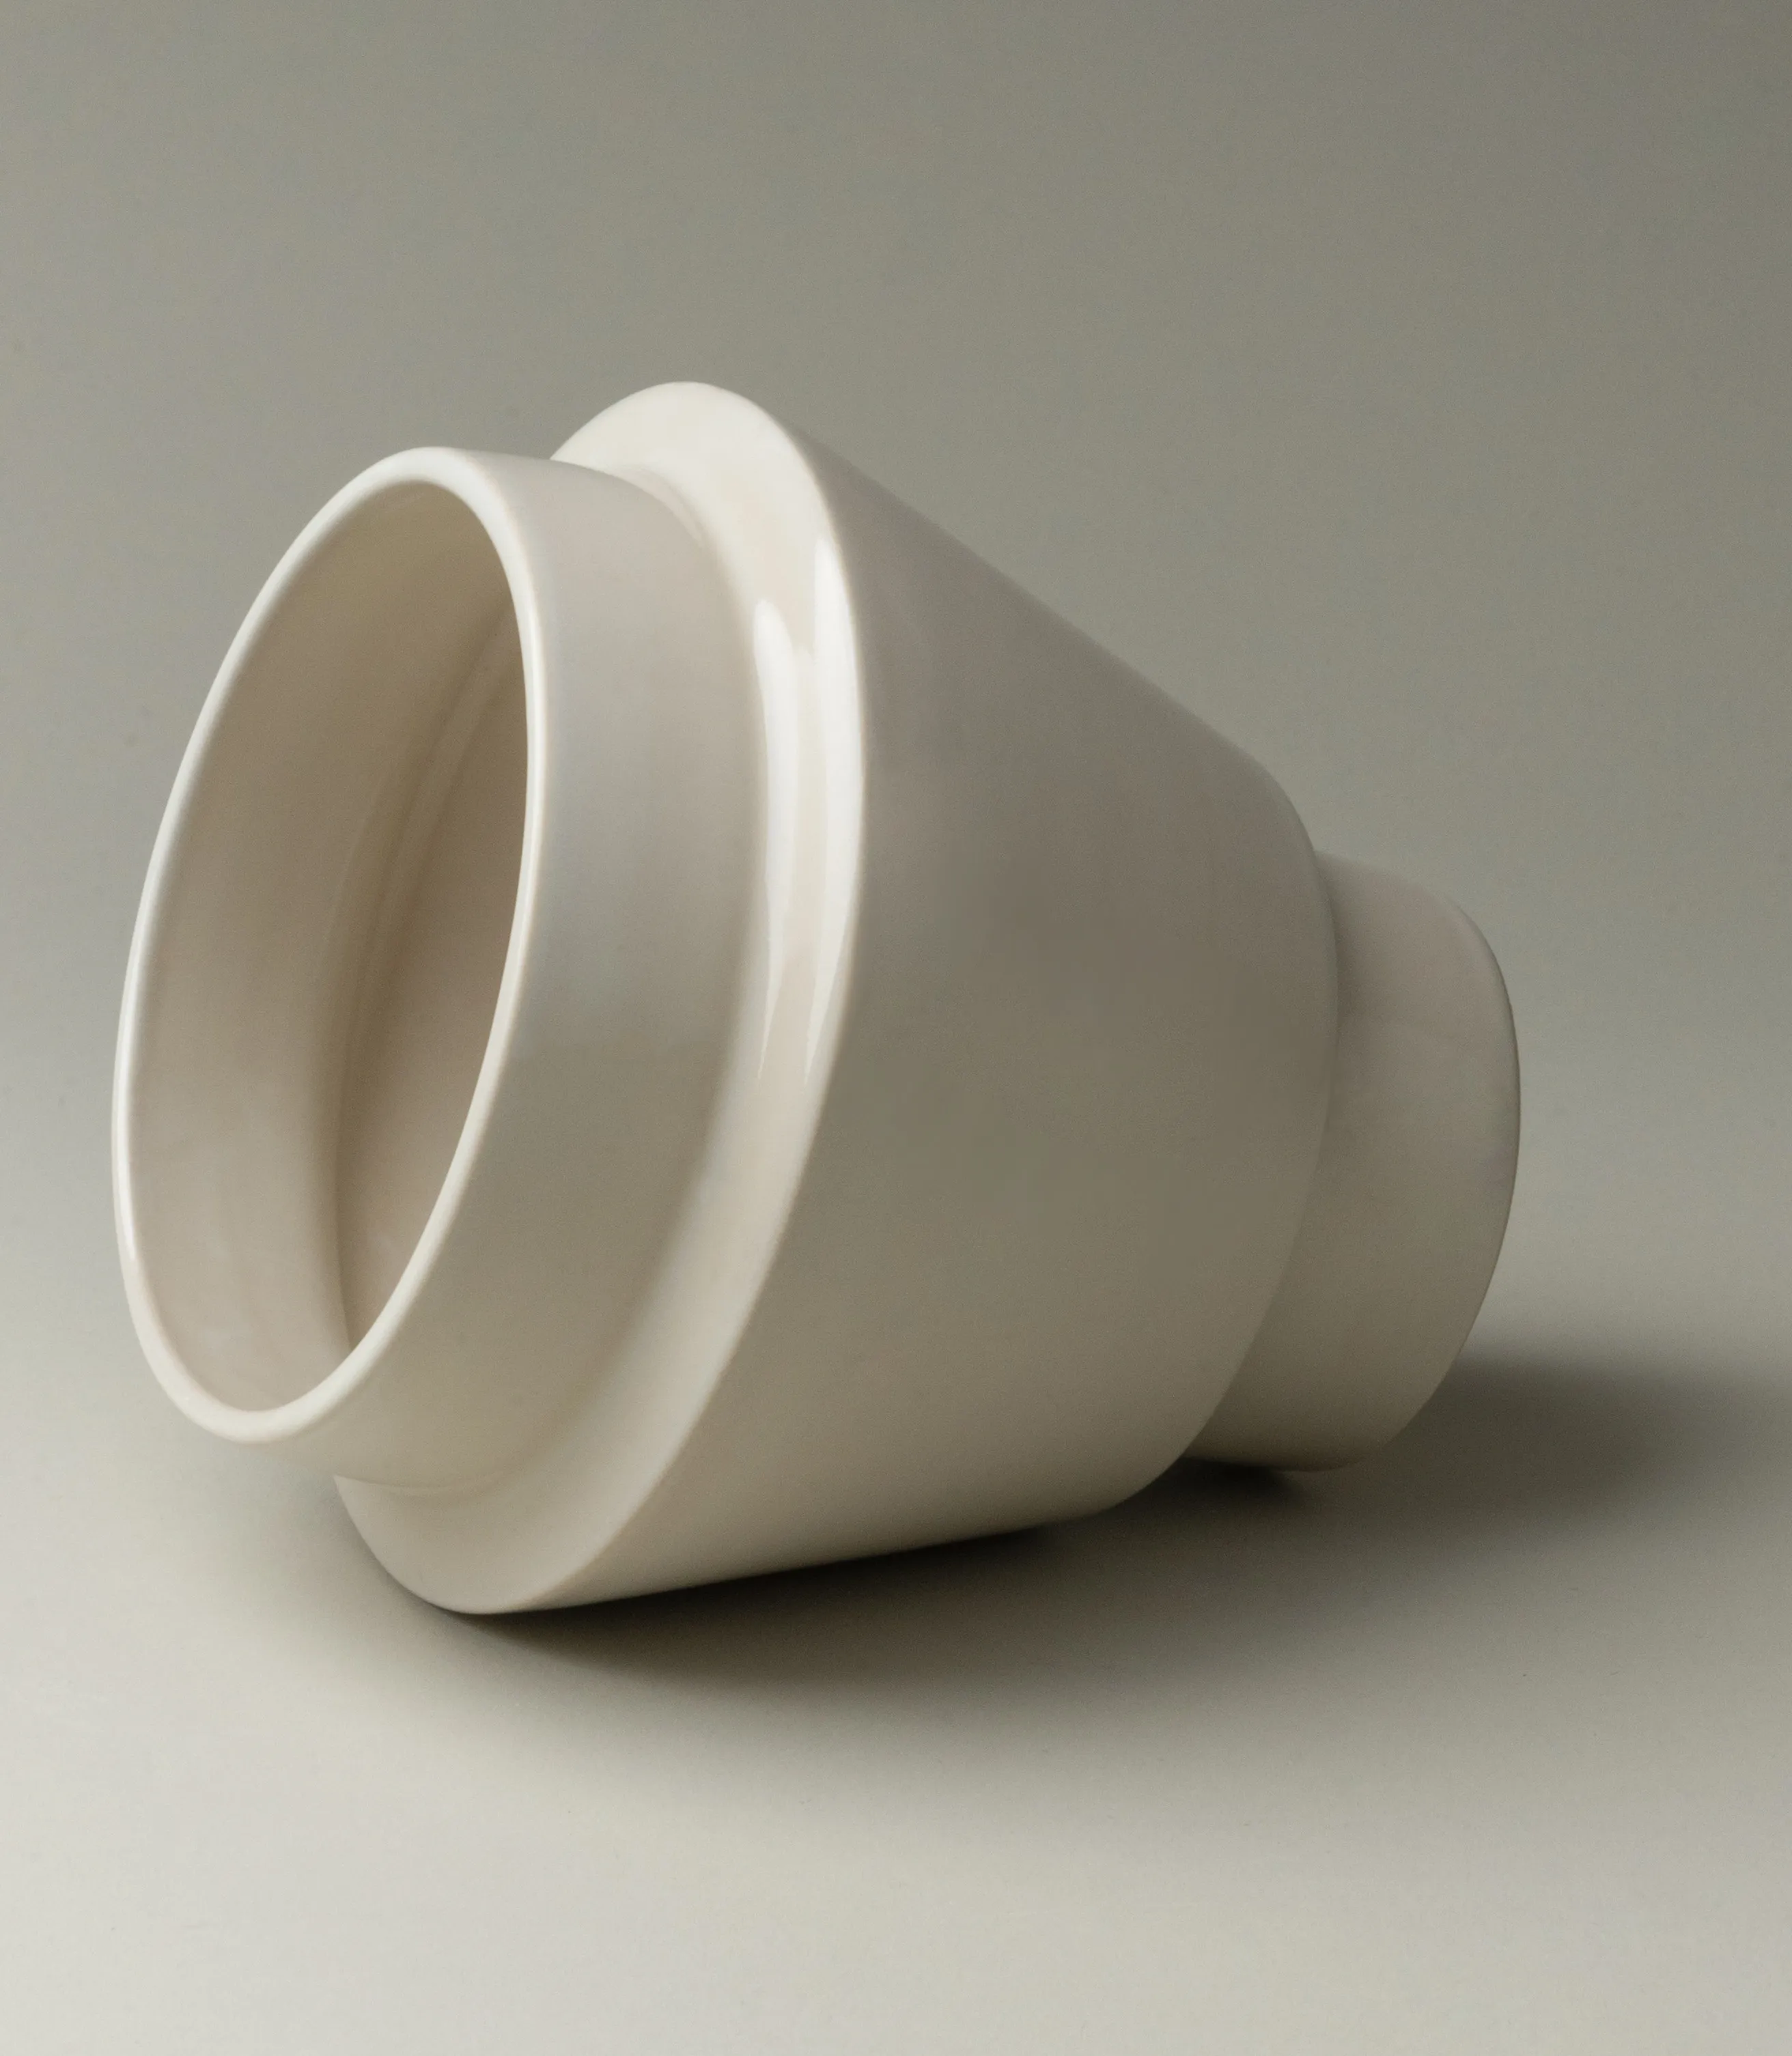 SW Buoy Planter from Nova Casa Atlantica comes in a white color. The product is glazed and has a glossy finishing.